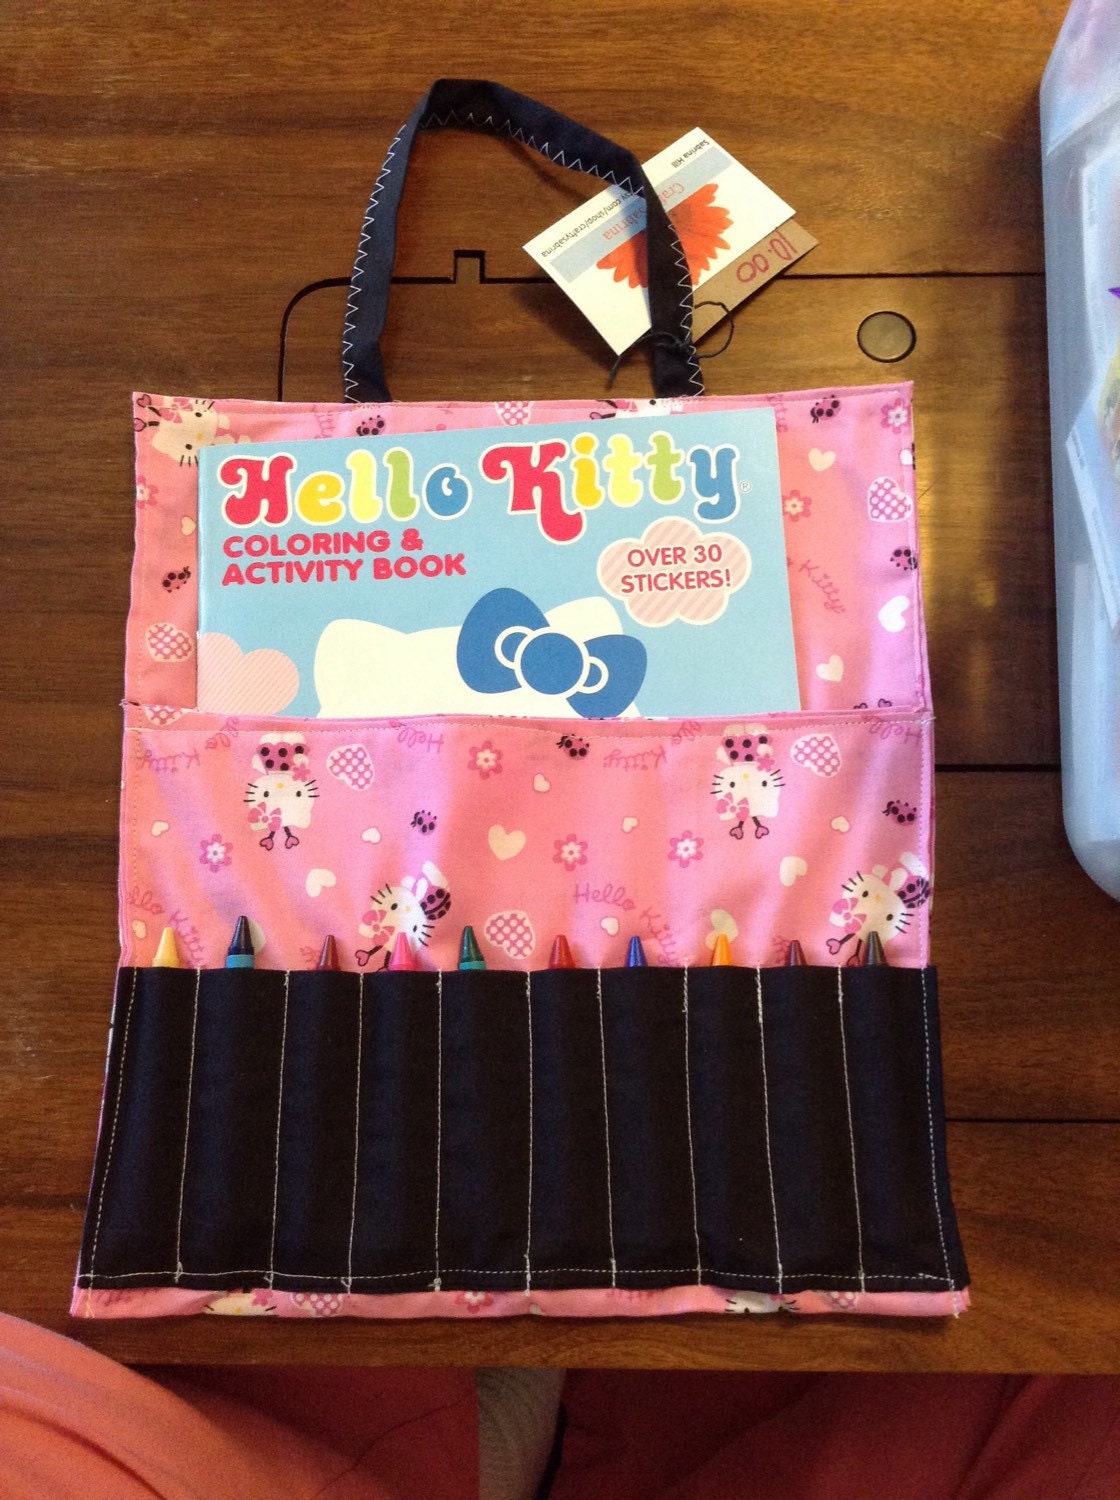 Download Hello kitty crayon and coloring book holder by CraftySabrina